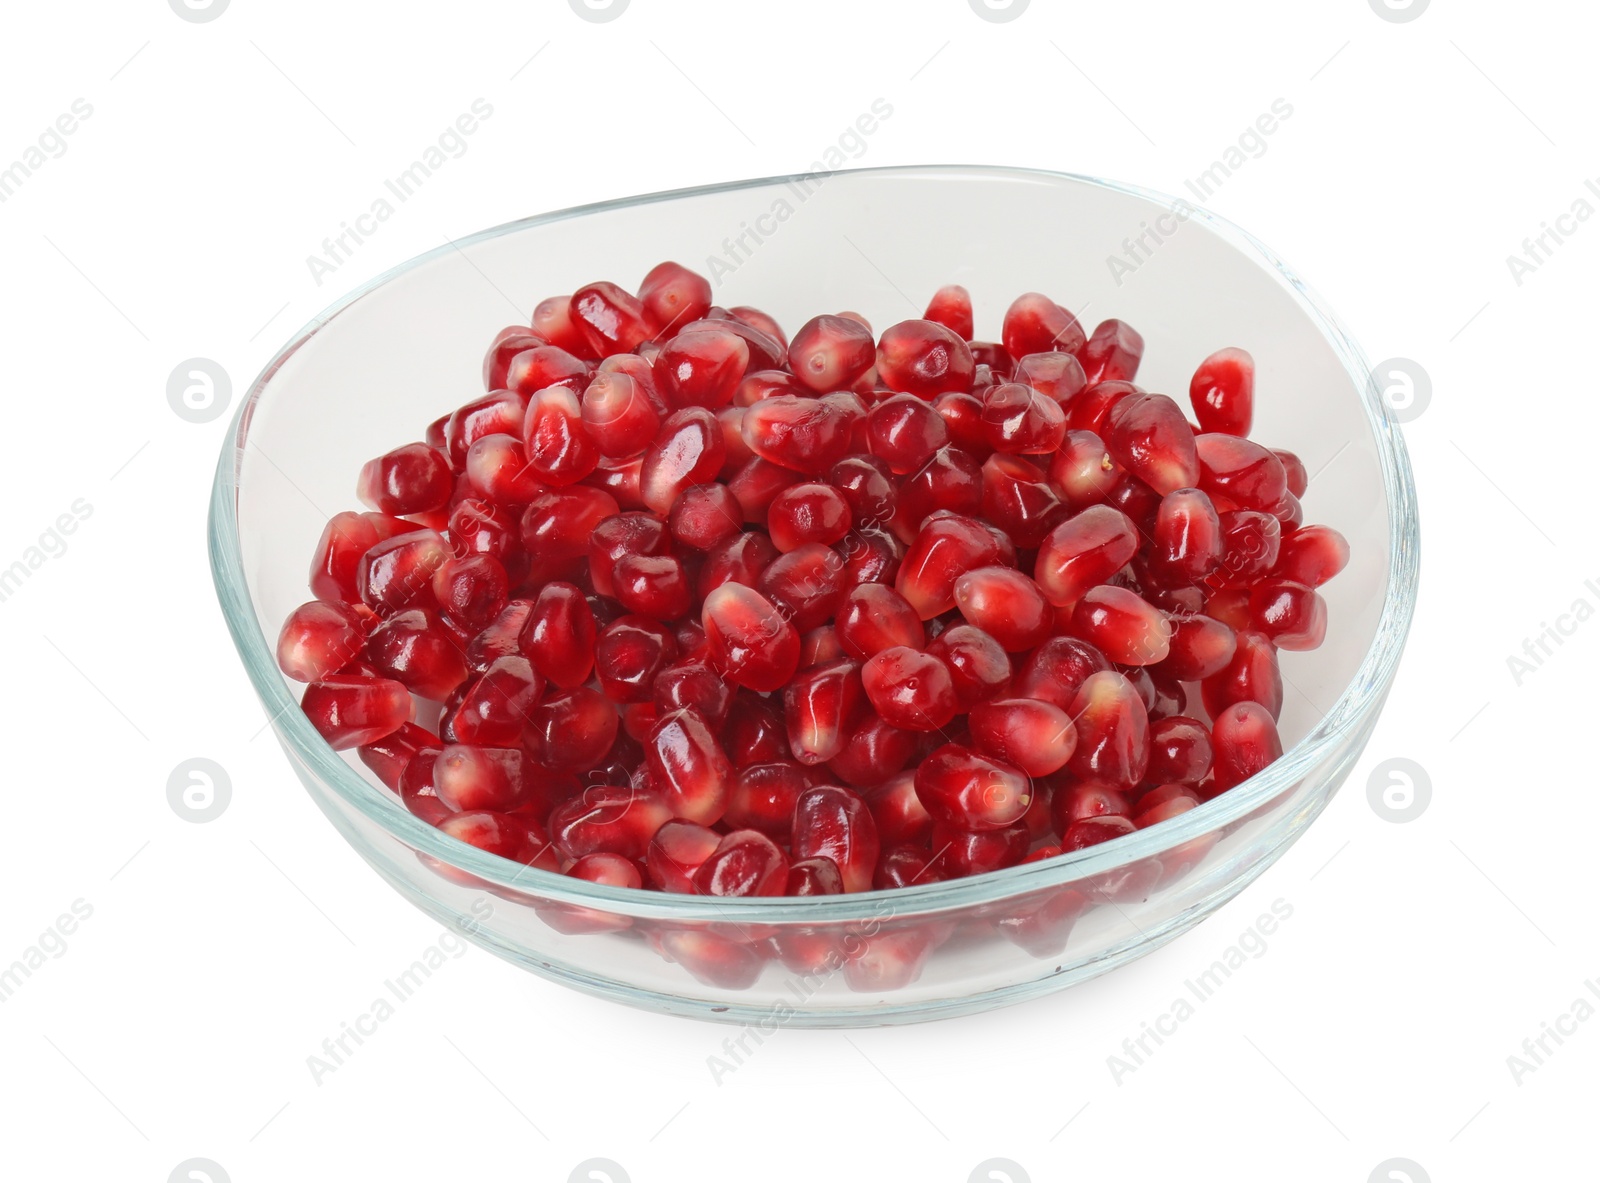 Photo of Ripe juicy pomegranate grains in bowl isolated on white